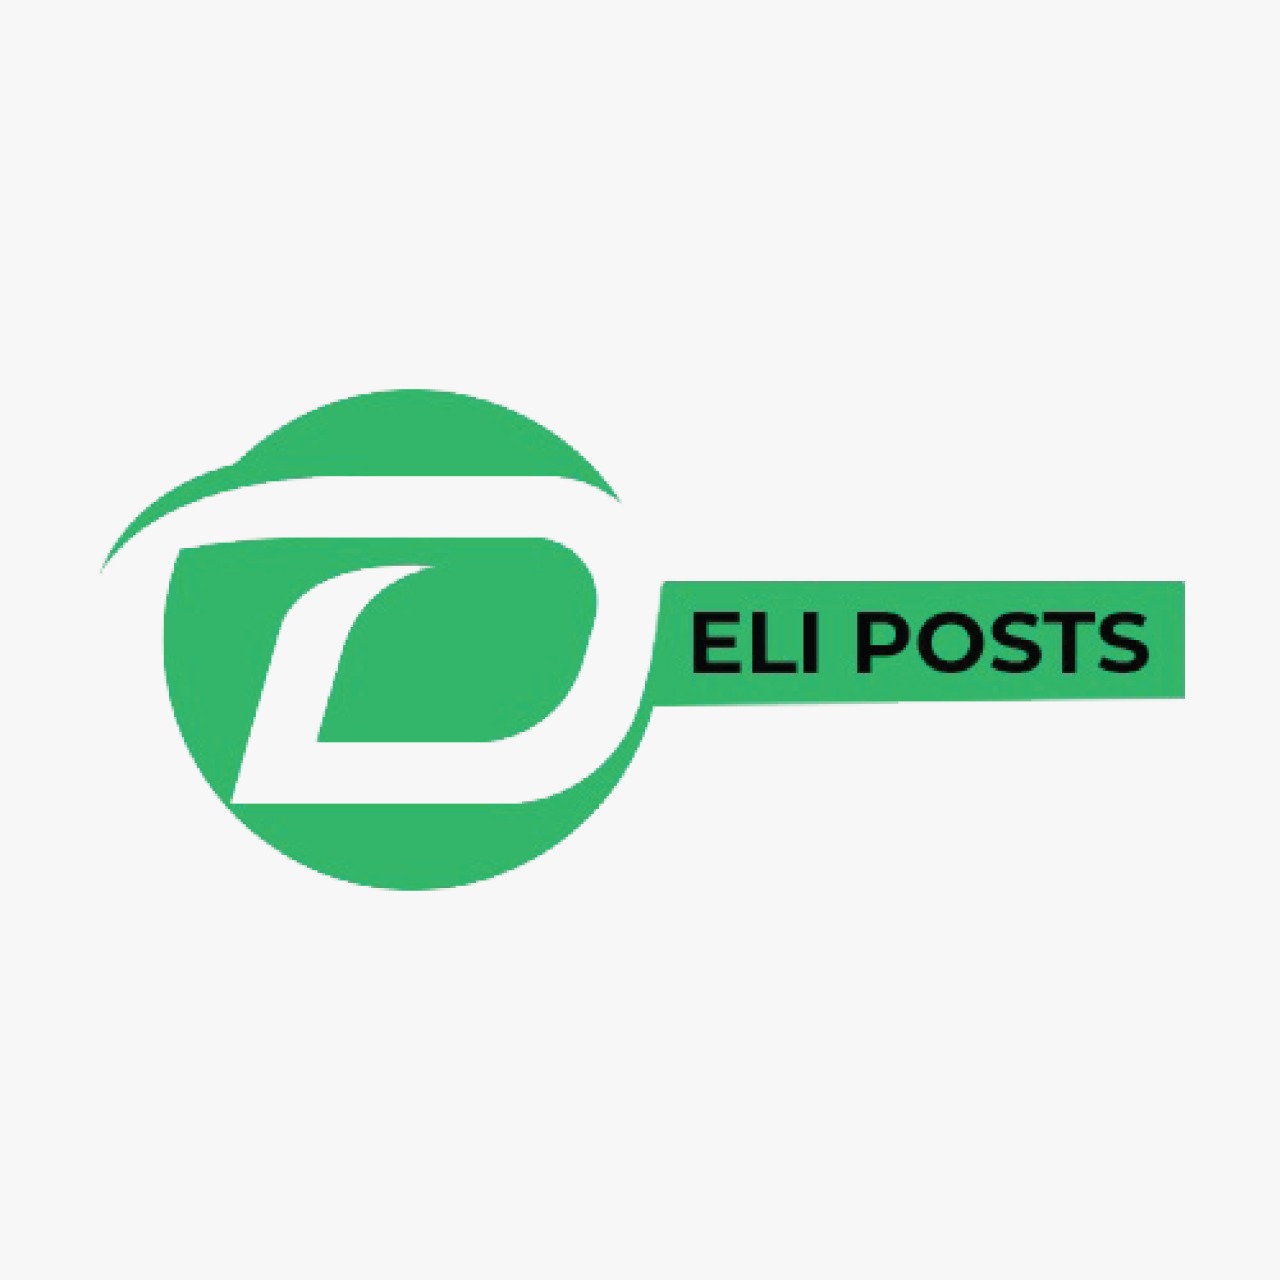 Deli posts Deli posts a perfect platform to get latest easy recipes and health related blogs for weight loss gain and all your fitness goals.https://bit.ly/3hAuWpO by delipost